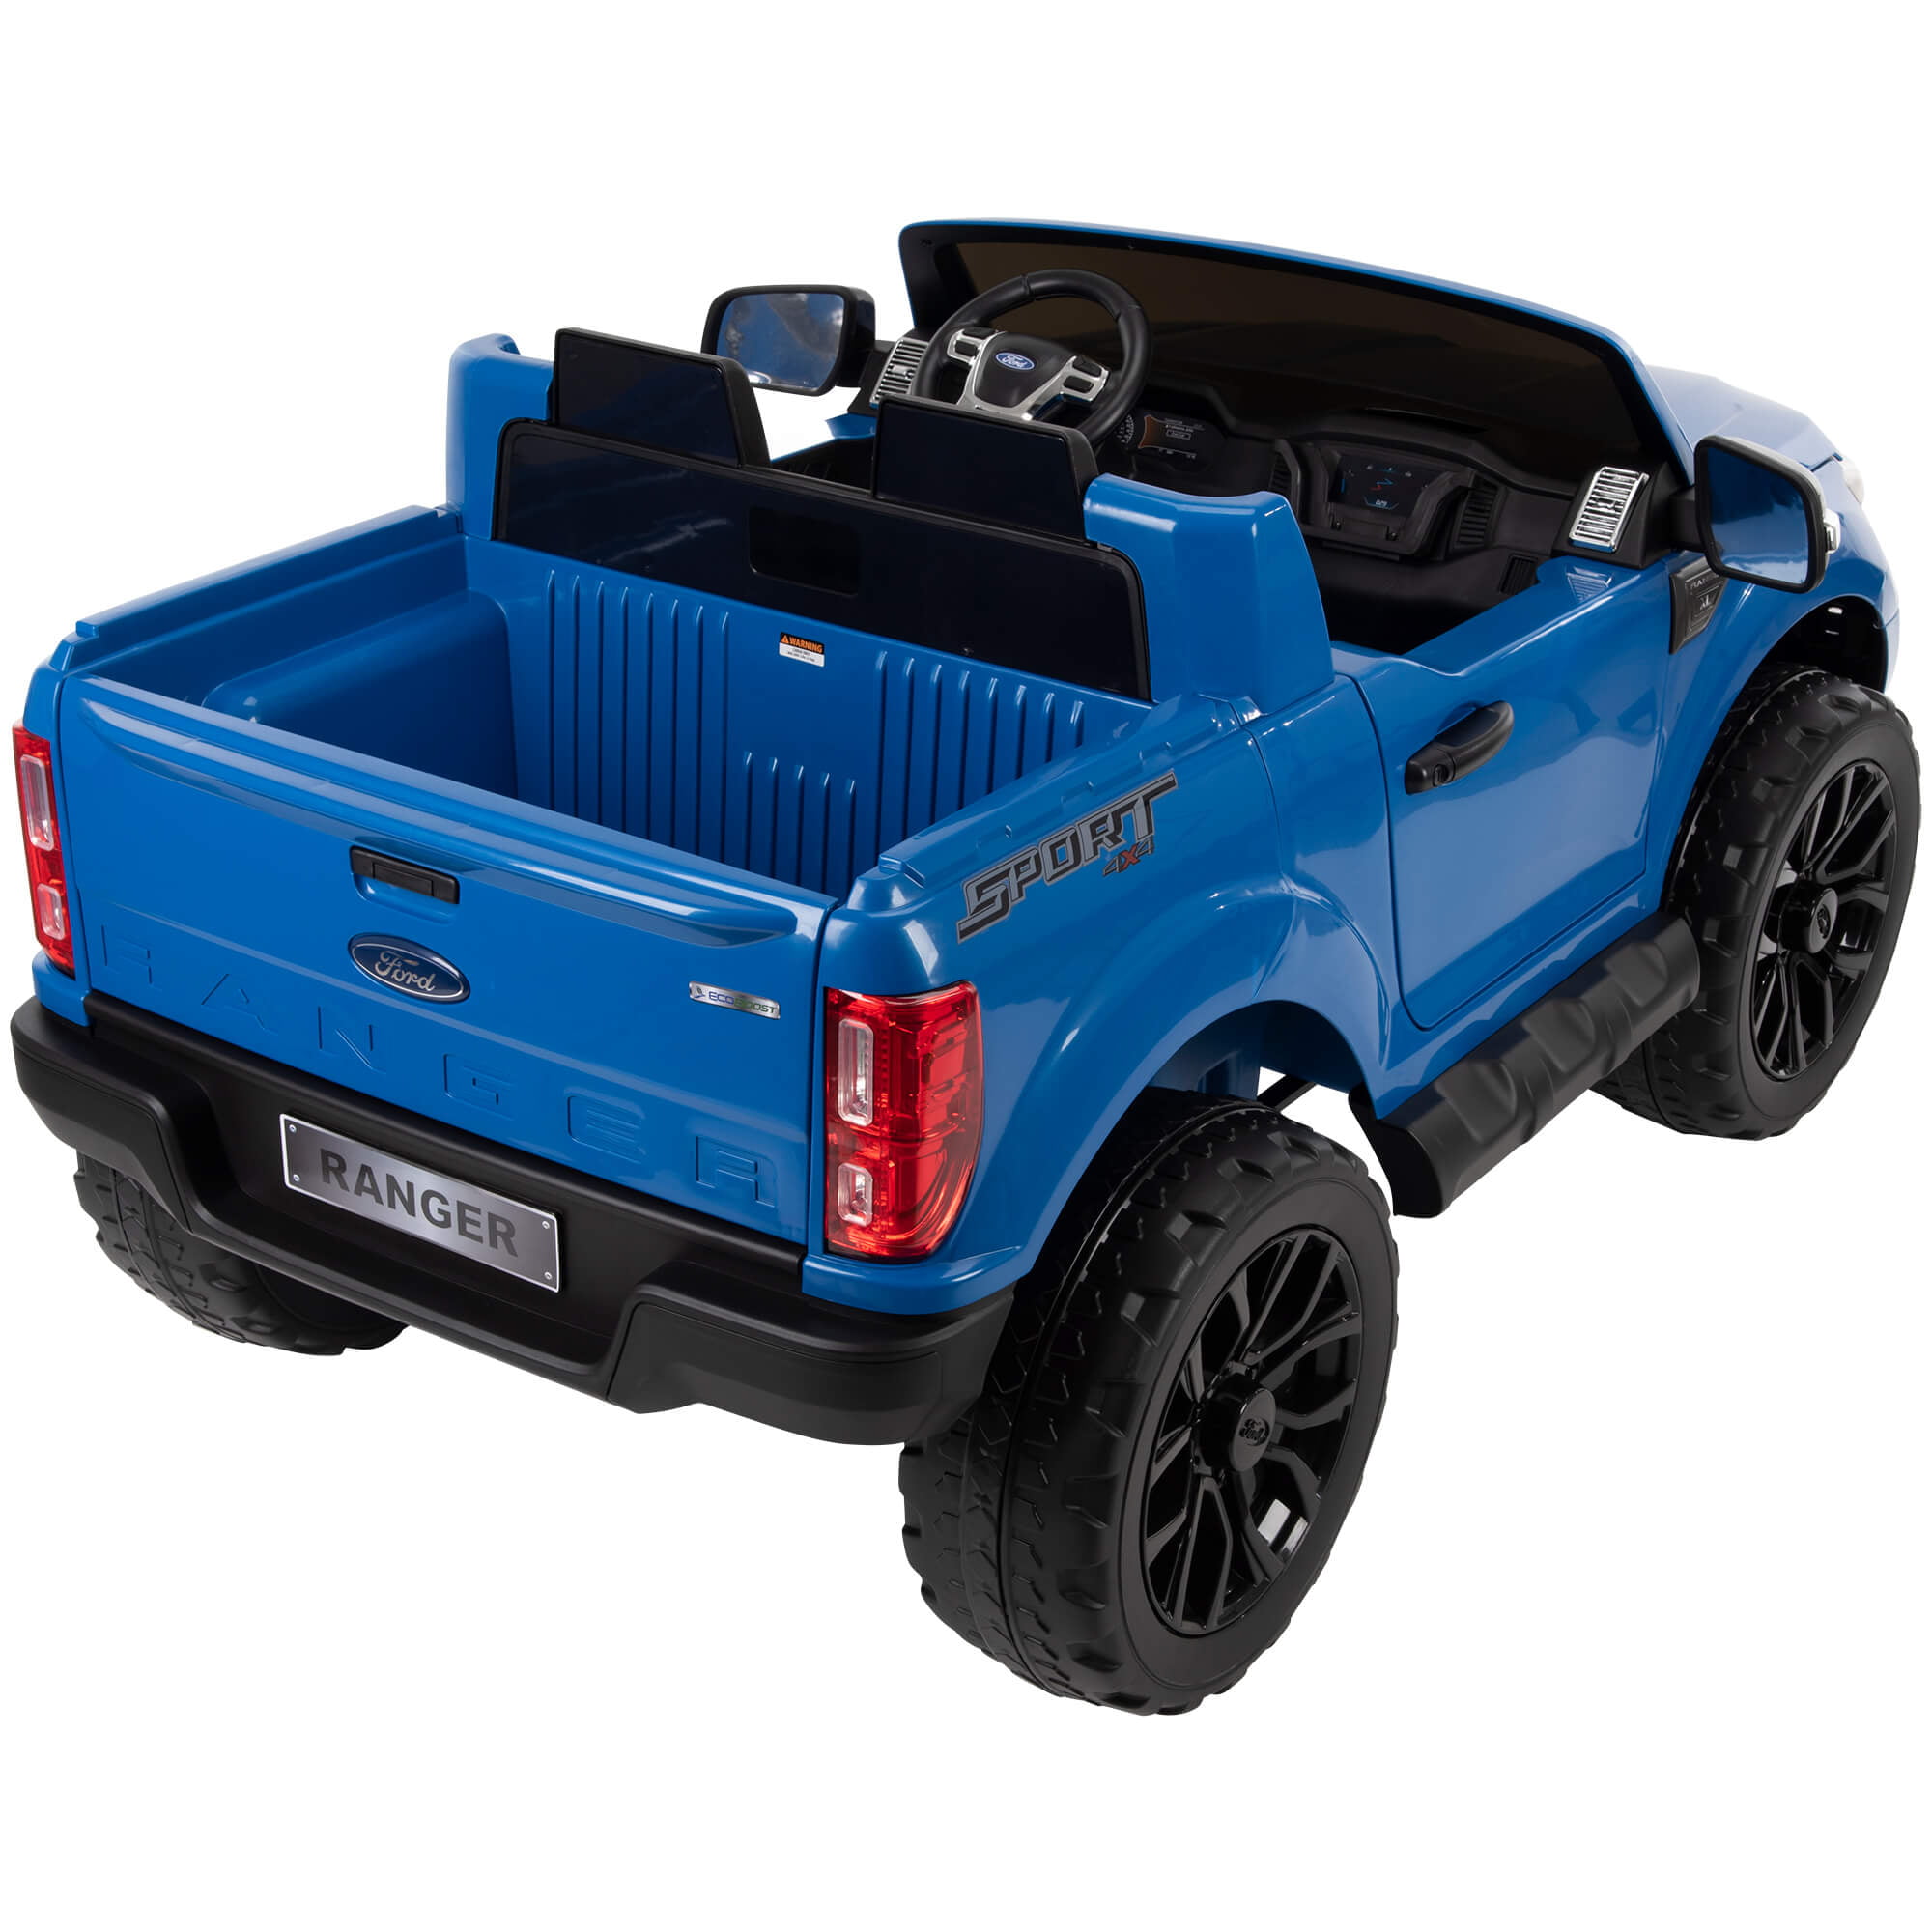 12V Ford Ranger Lariat Ride-On Electric Car for Kids by Huffy